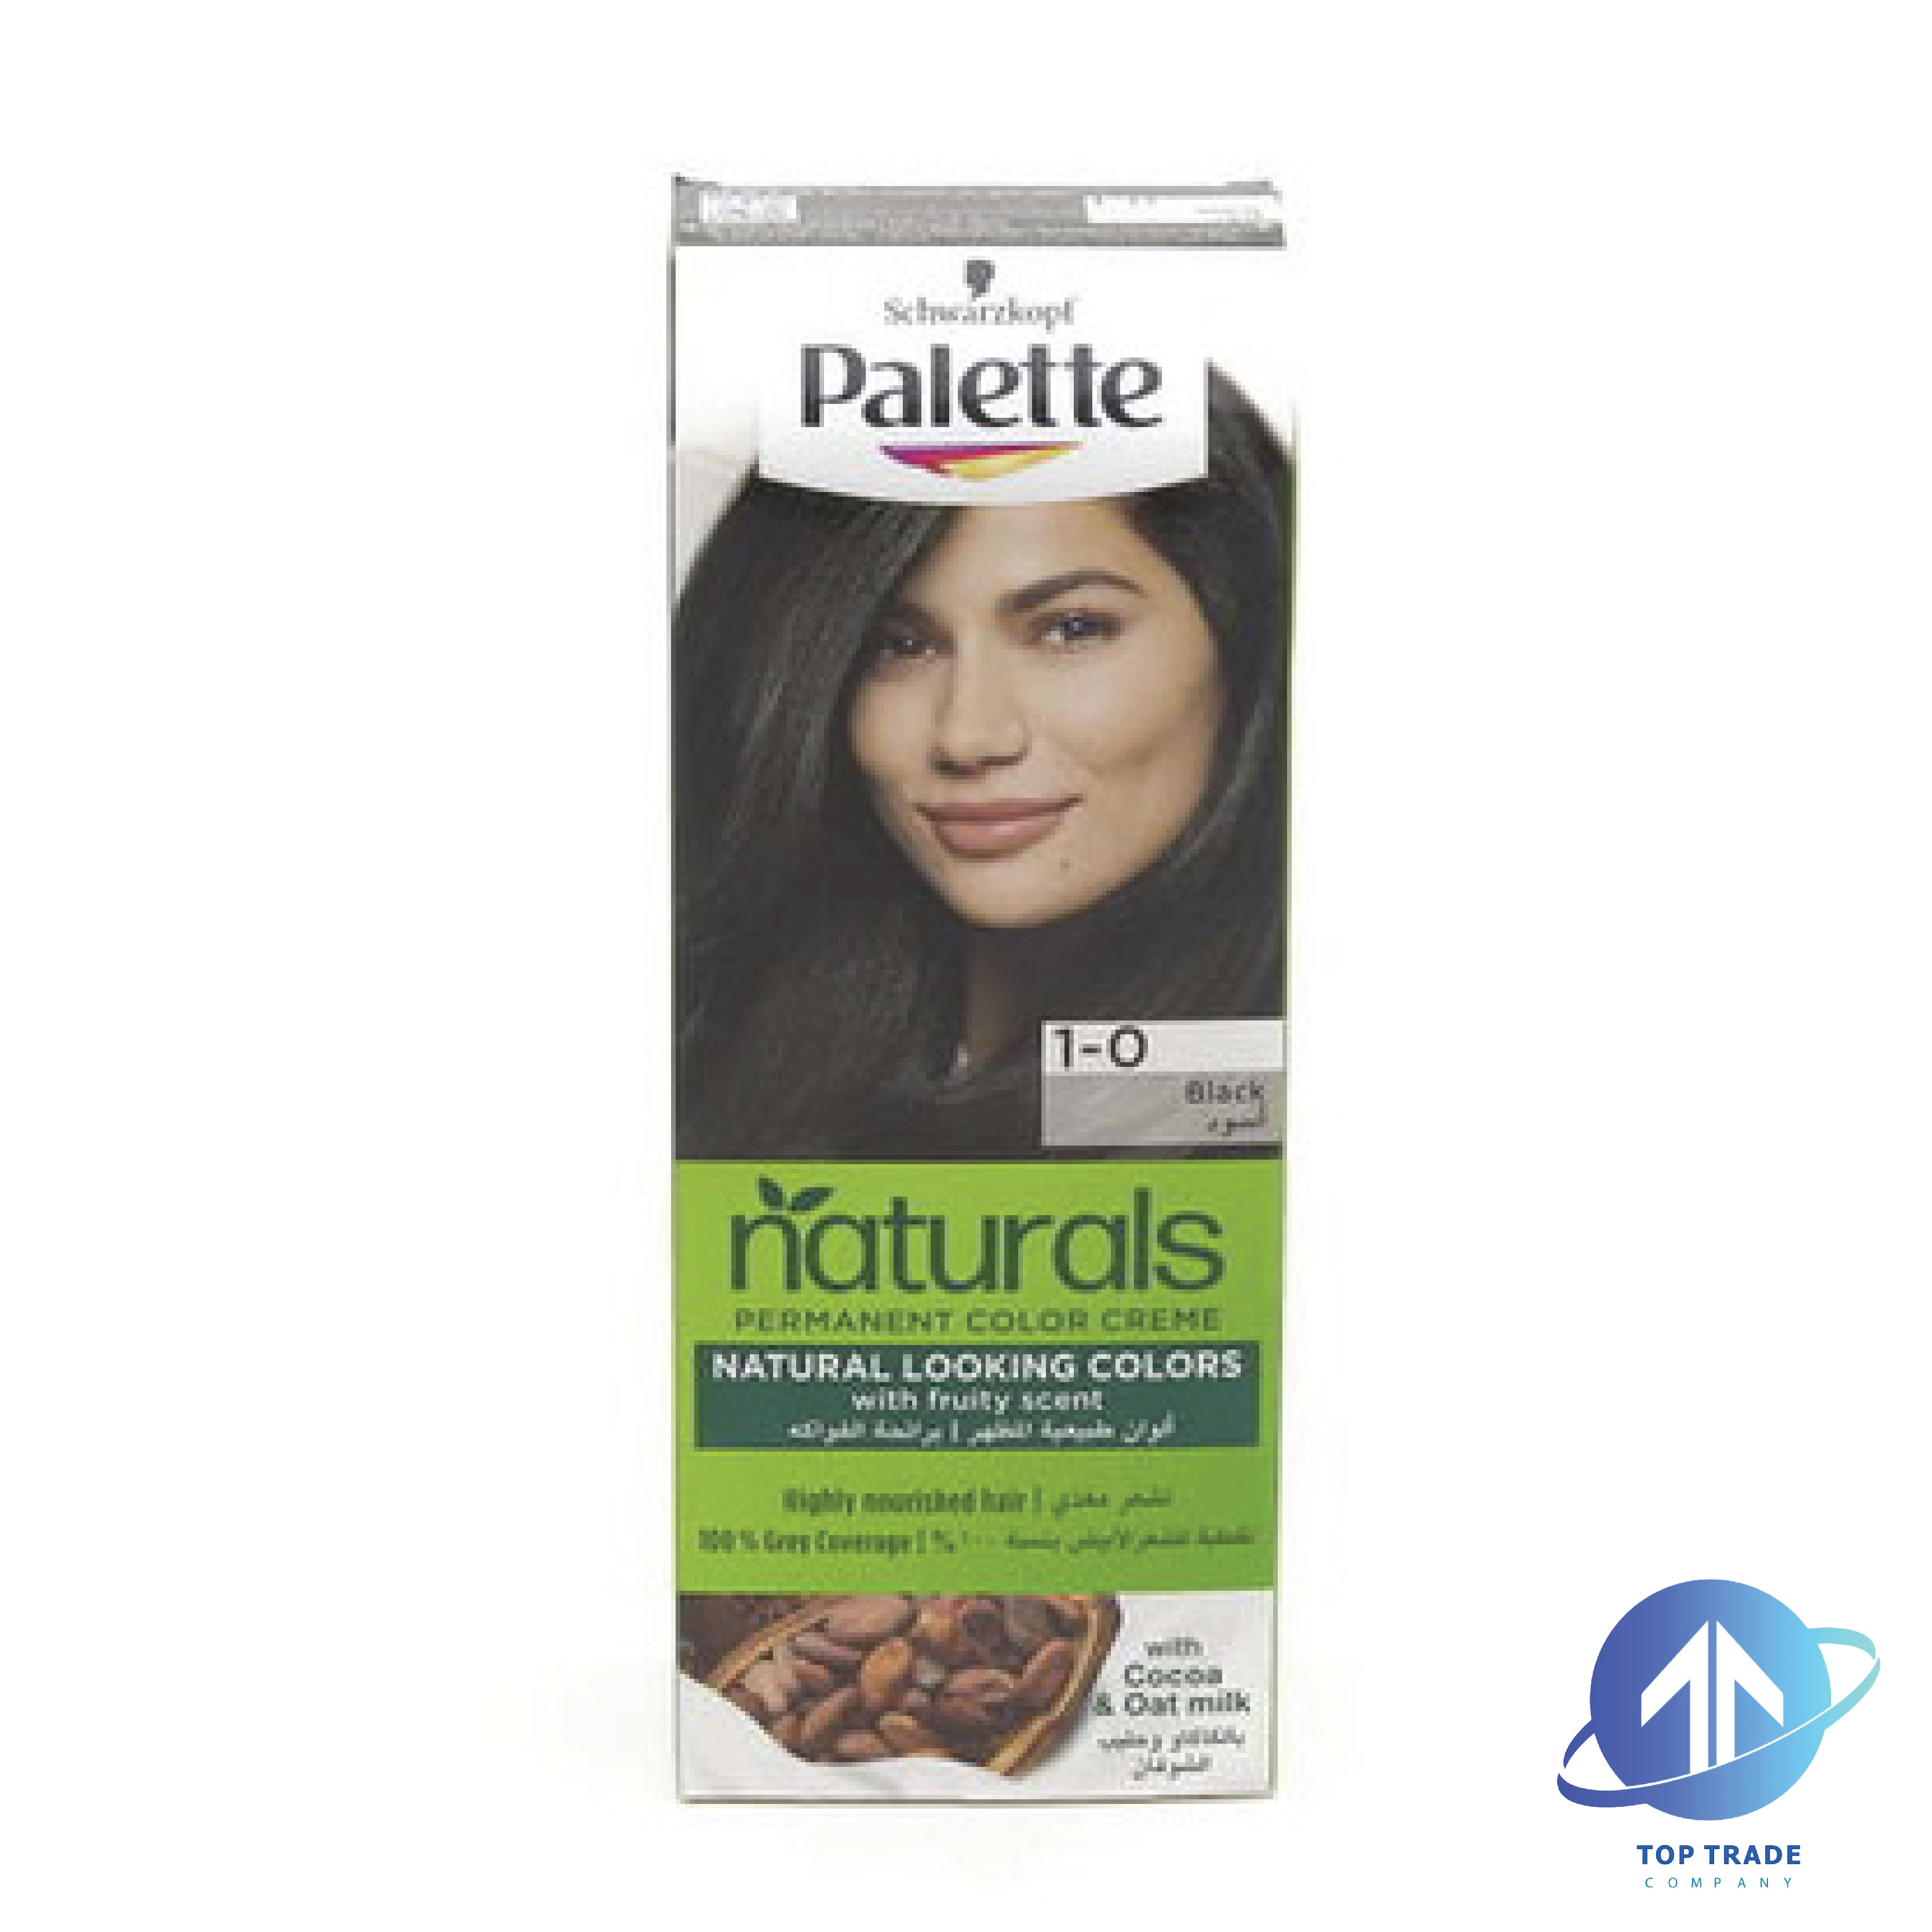 Palette hair coloring with argon oil hair color 1-0 black